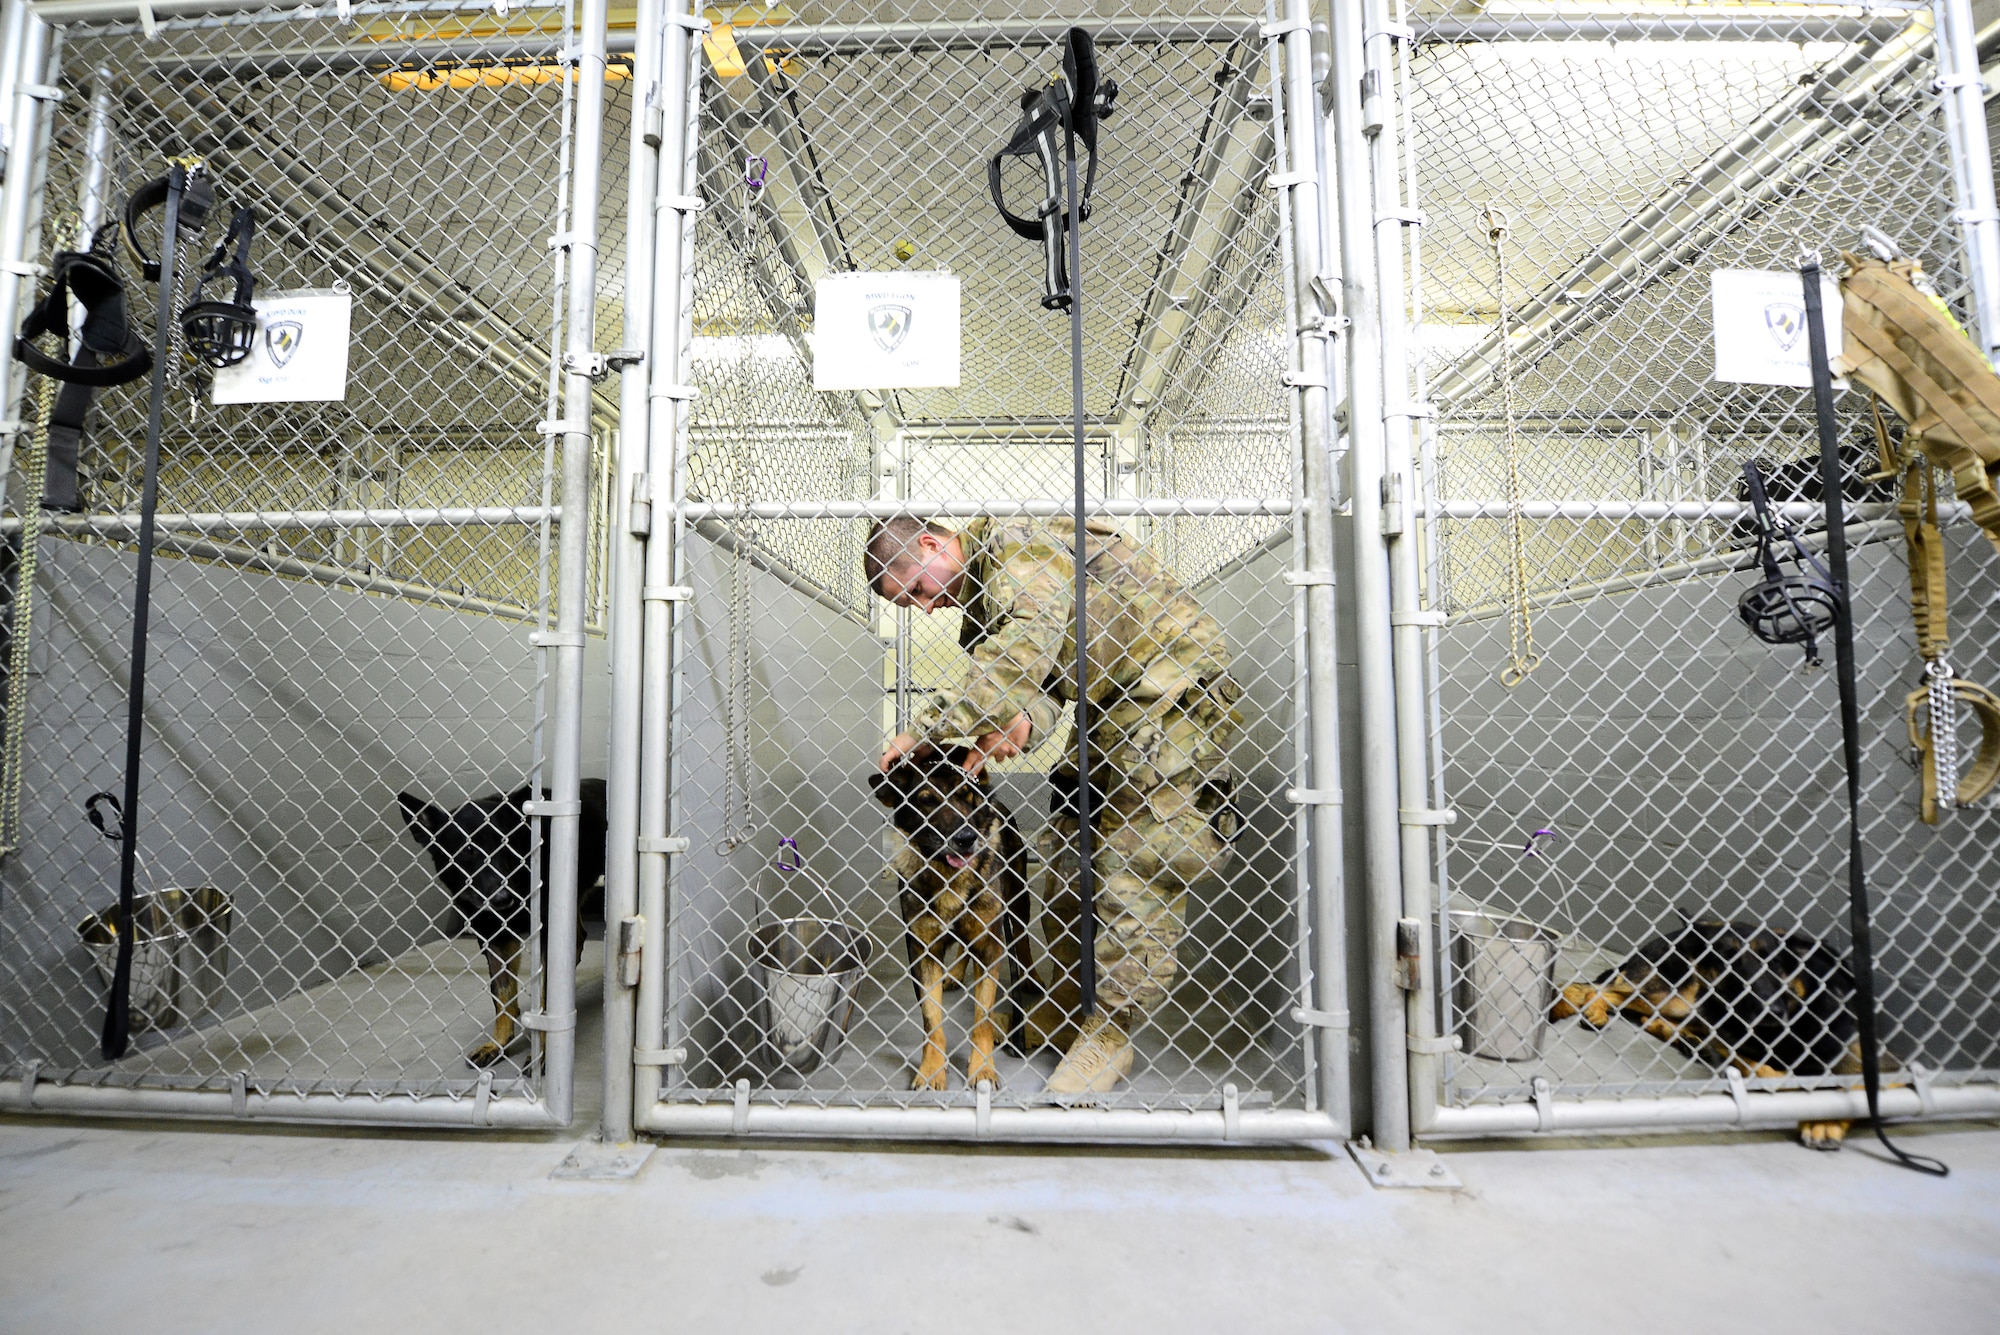 U.S. Air Force Senior Airman Carlton Isaacson, a military working dog handler assigned to the 407th Expeditionary Security Forces Squadron fastens the leash on his military working dog Egon, prior to patrols in Southwest Asia on May 23, 2017. Isaacson and Egon have been partners for two years now and are deployed in support of Operation Inherent Resolve. Military working dogs are the first line of defense when it comes to explosive detection and provide security sweeps throughout the installation. (U.S. Air Force photo by Tech Sgt. Andy M. Kin)